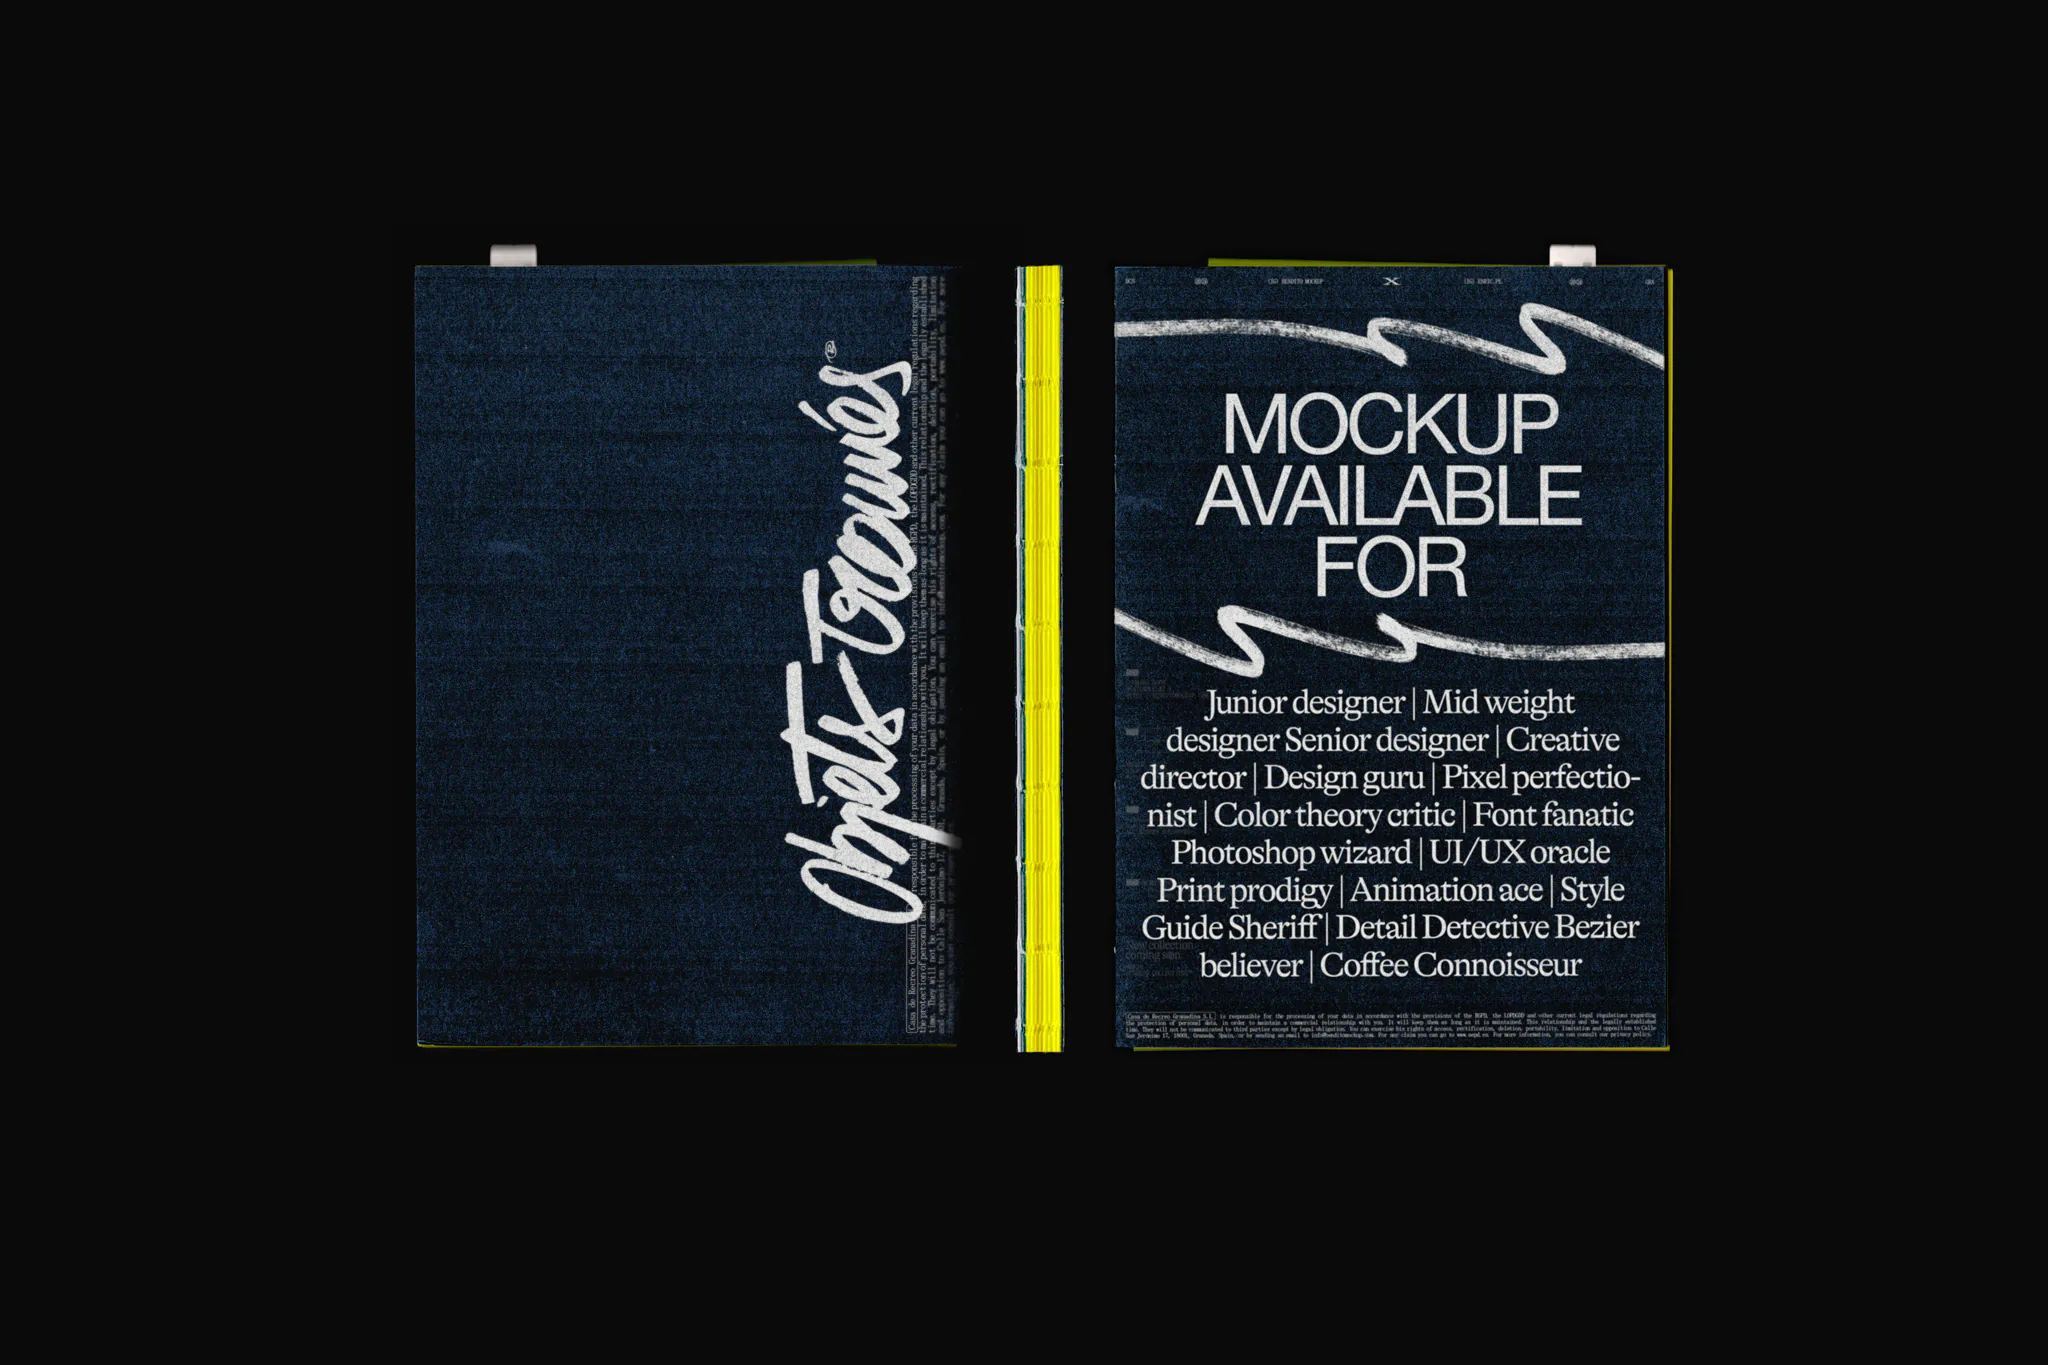 Mockup of notebook with different views, mockup of front, back and spine of magazine, scanned notebook with real texture, scanned magazine mockup, front and back notebook mockup, stationery minimalist mockup, high quality mockup for Adobe Photoshop.